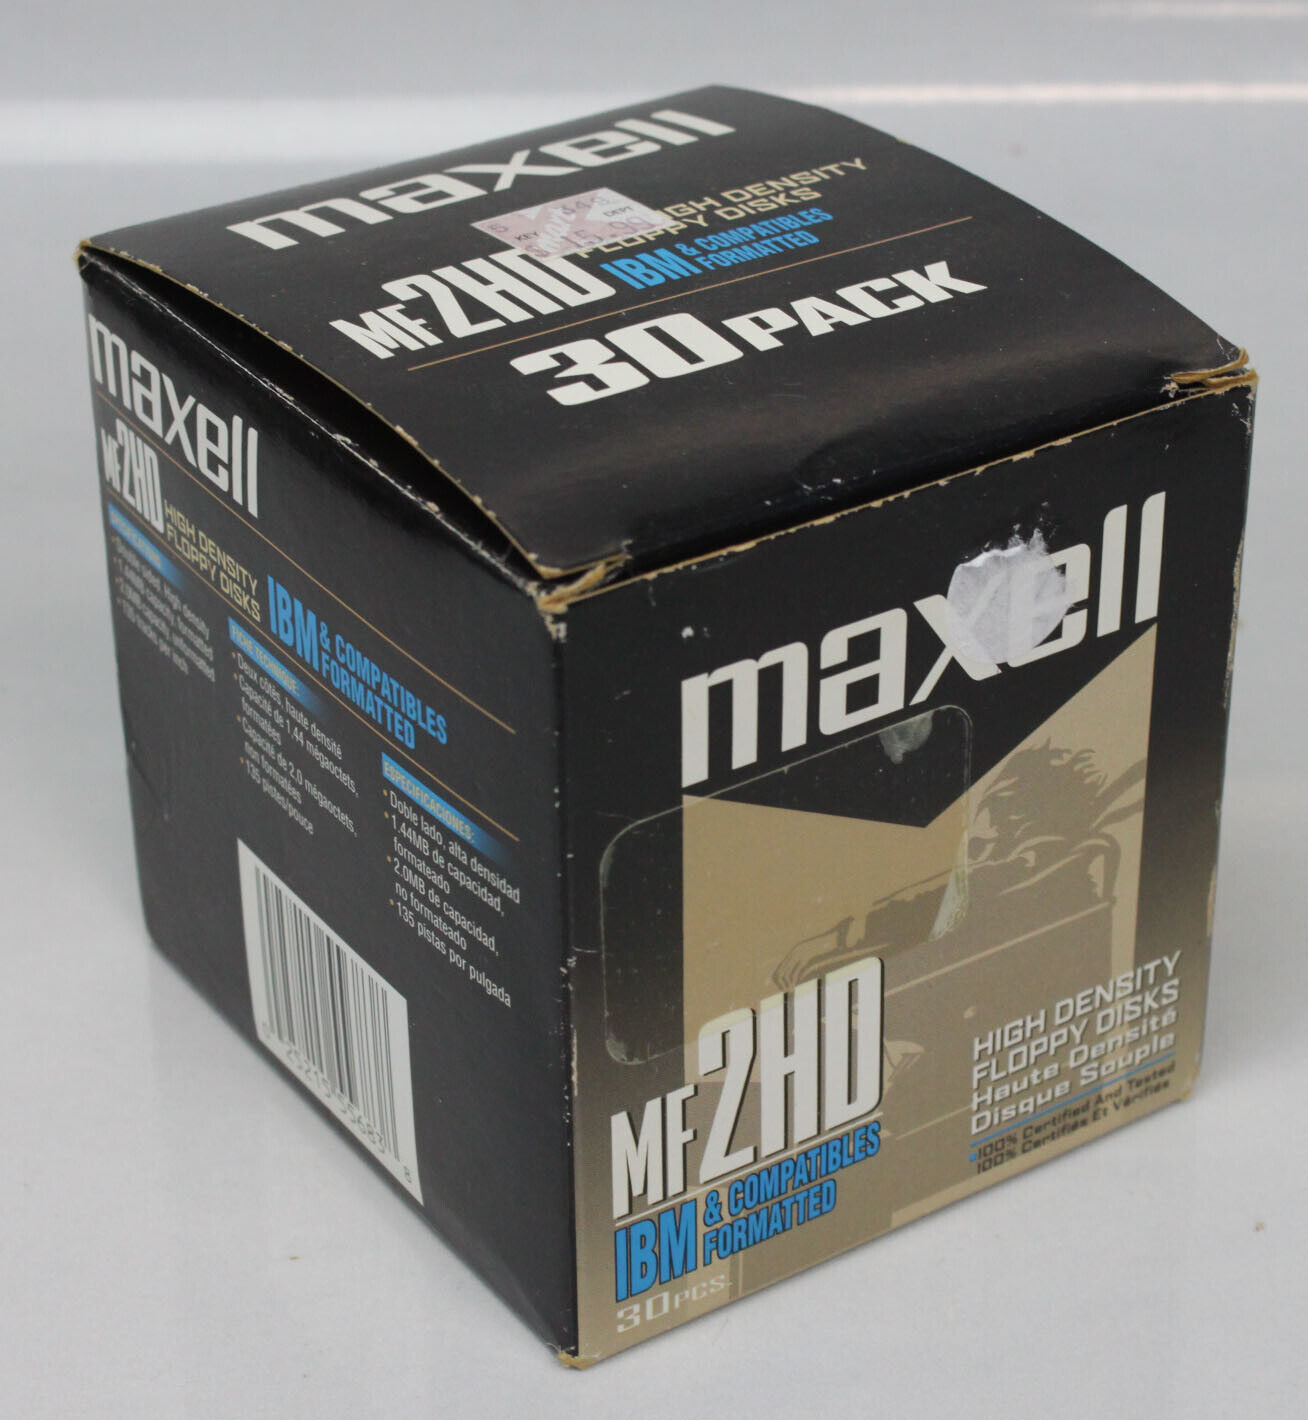 Vtg Maxell Floppy Disks Box of 30 MF2HD IBM & Compatibles Formatted Unused Boxed